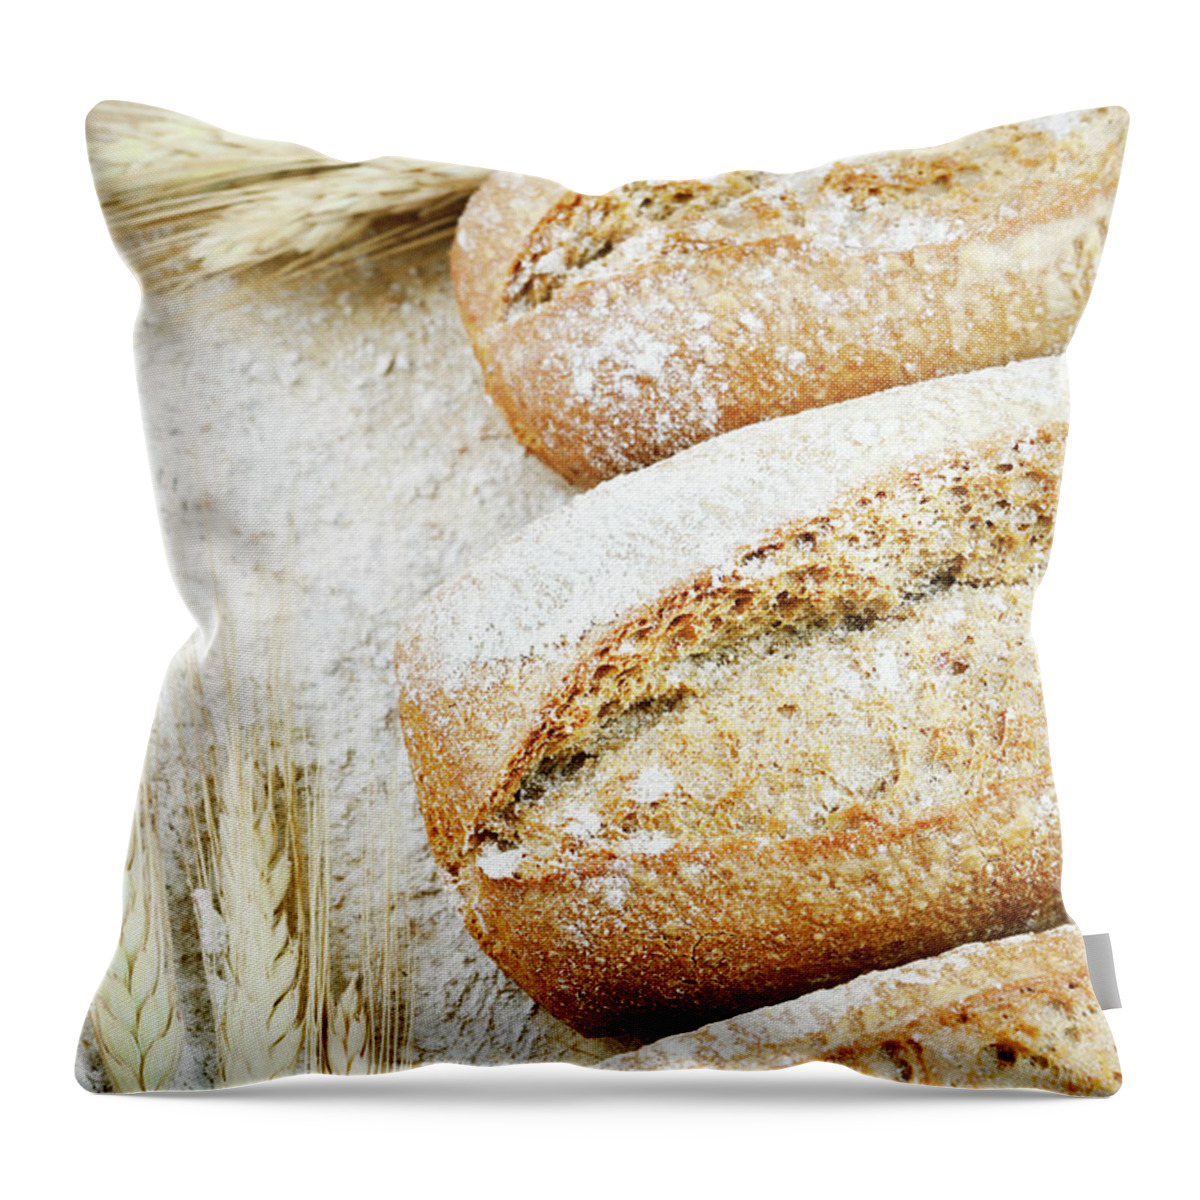 Breakfast Throw Pillow featuring the photograph Bread by Cactusoup